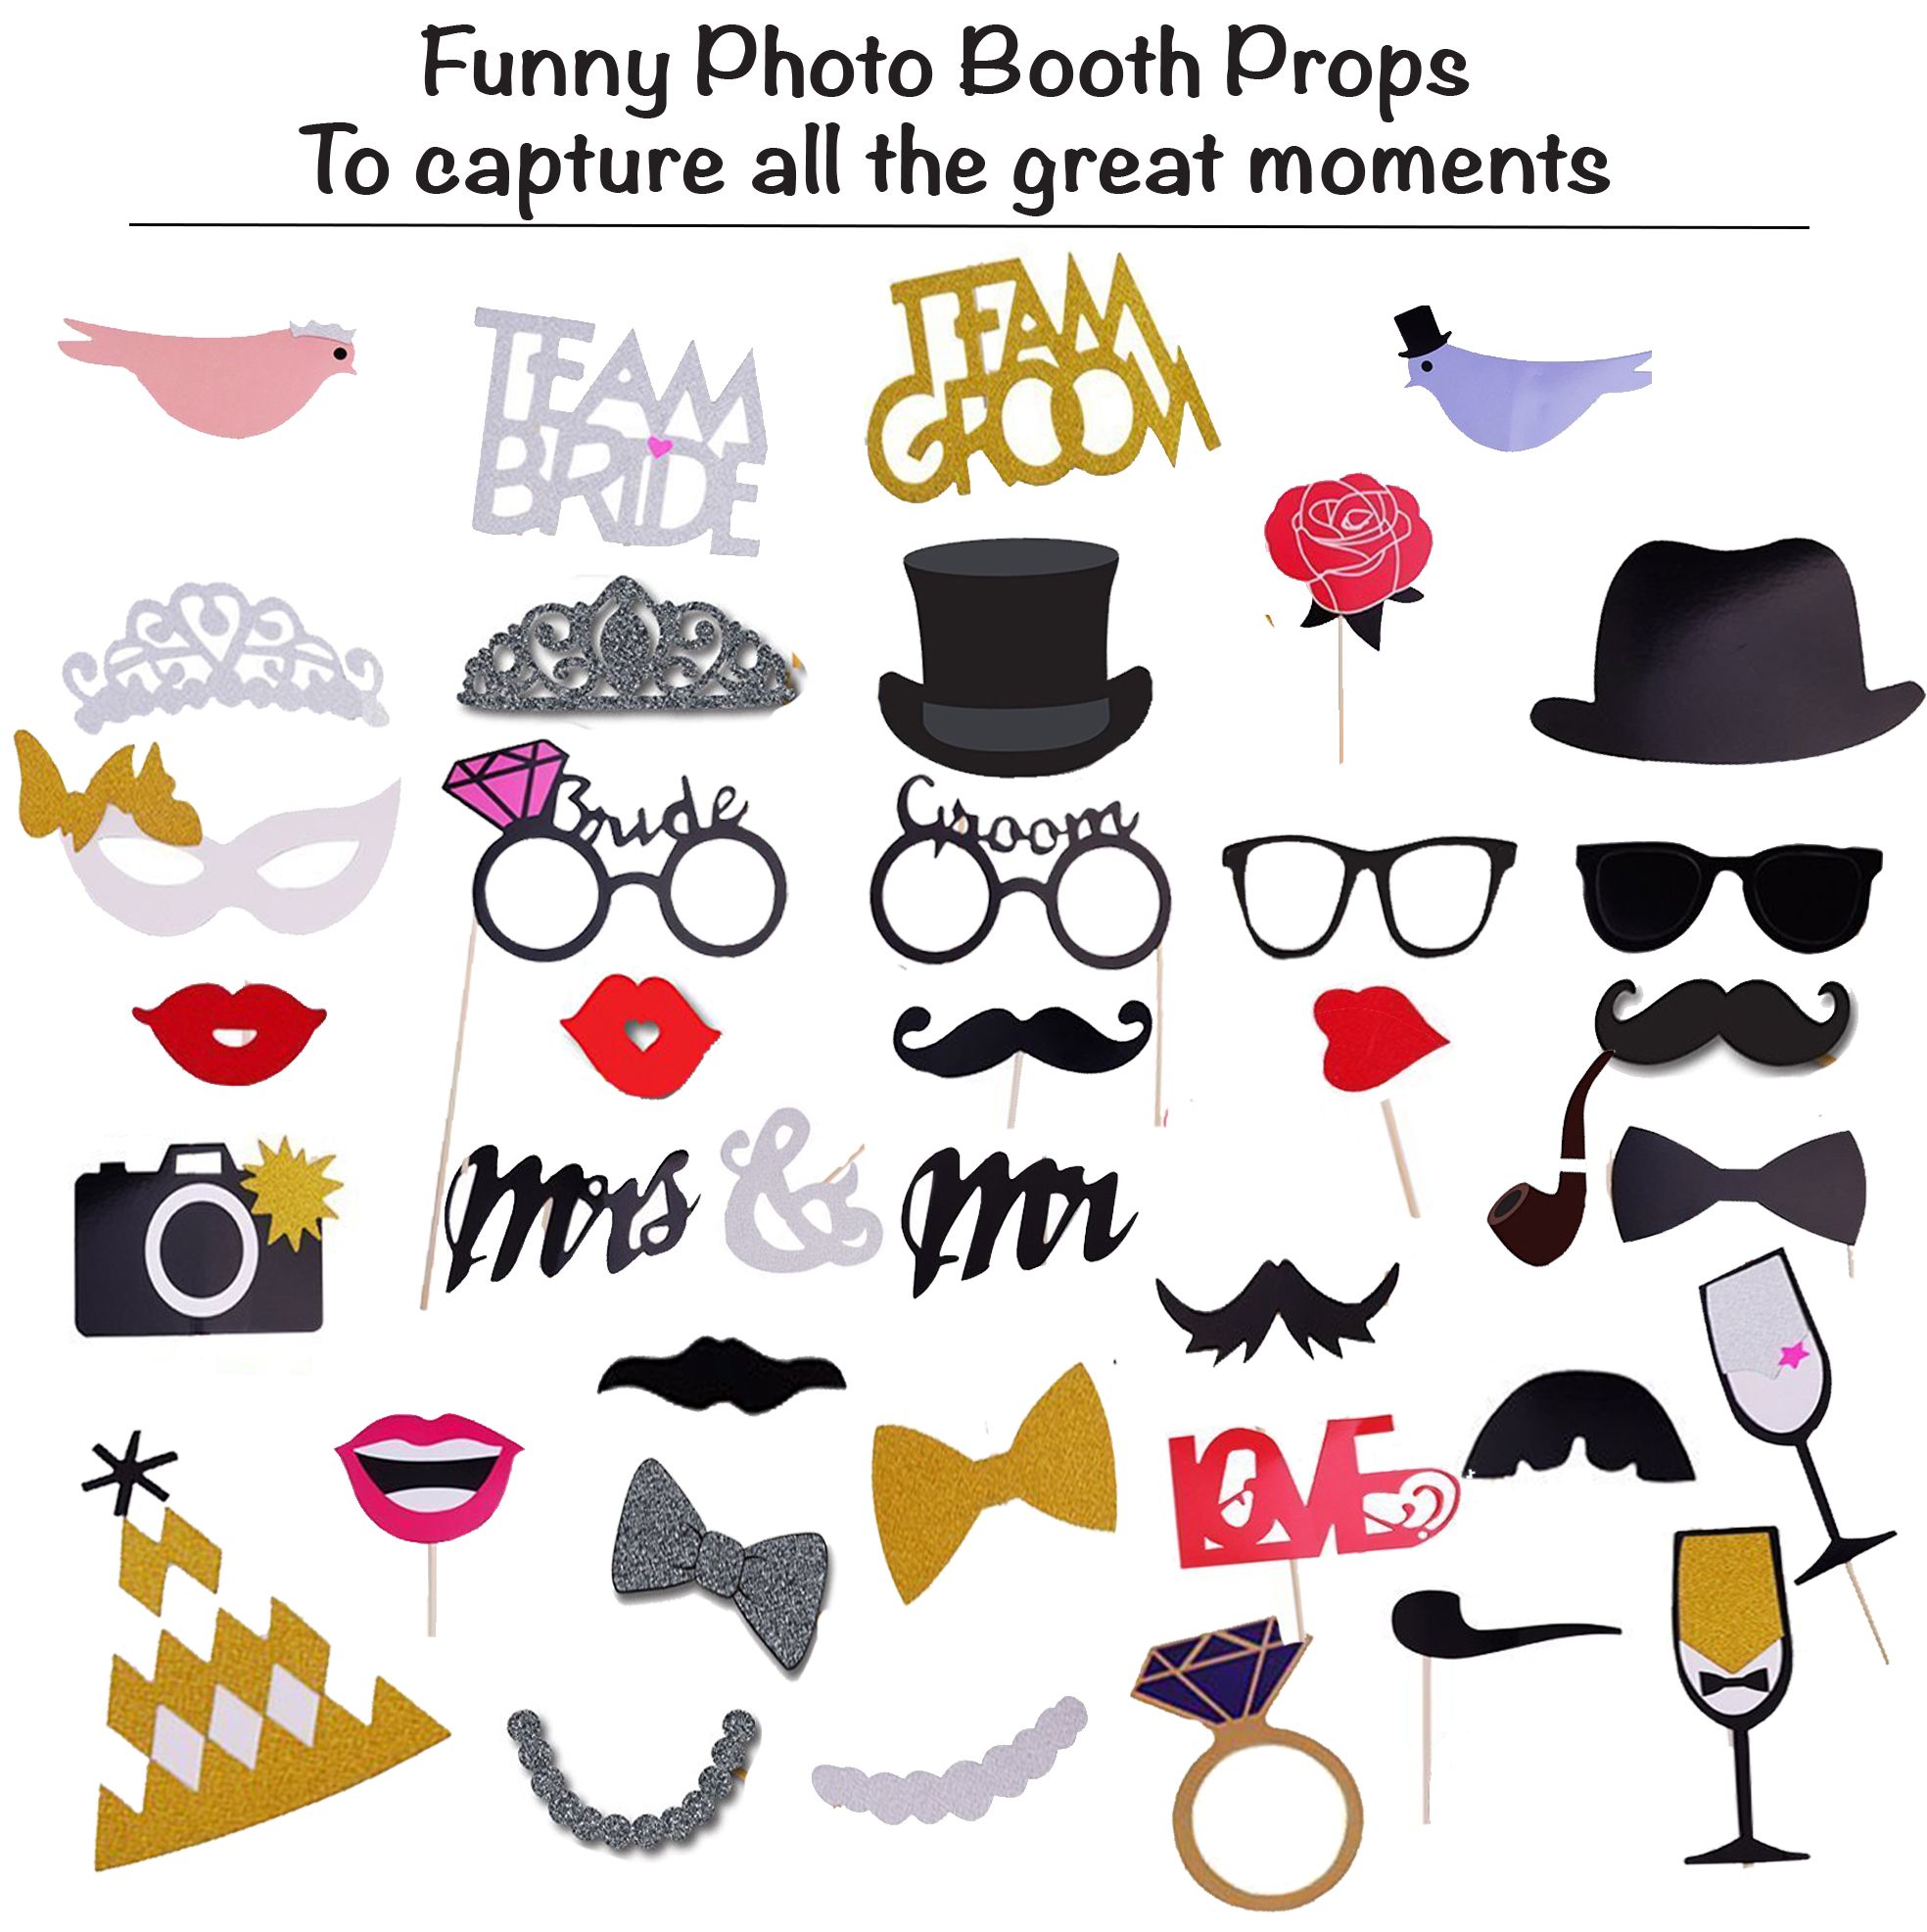 Wedding Photo Booth Props Funny 2021